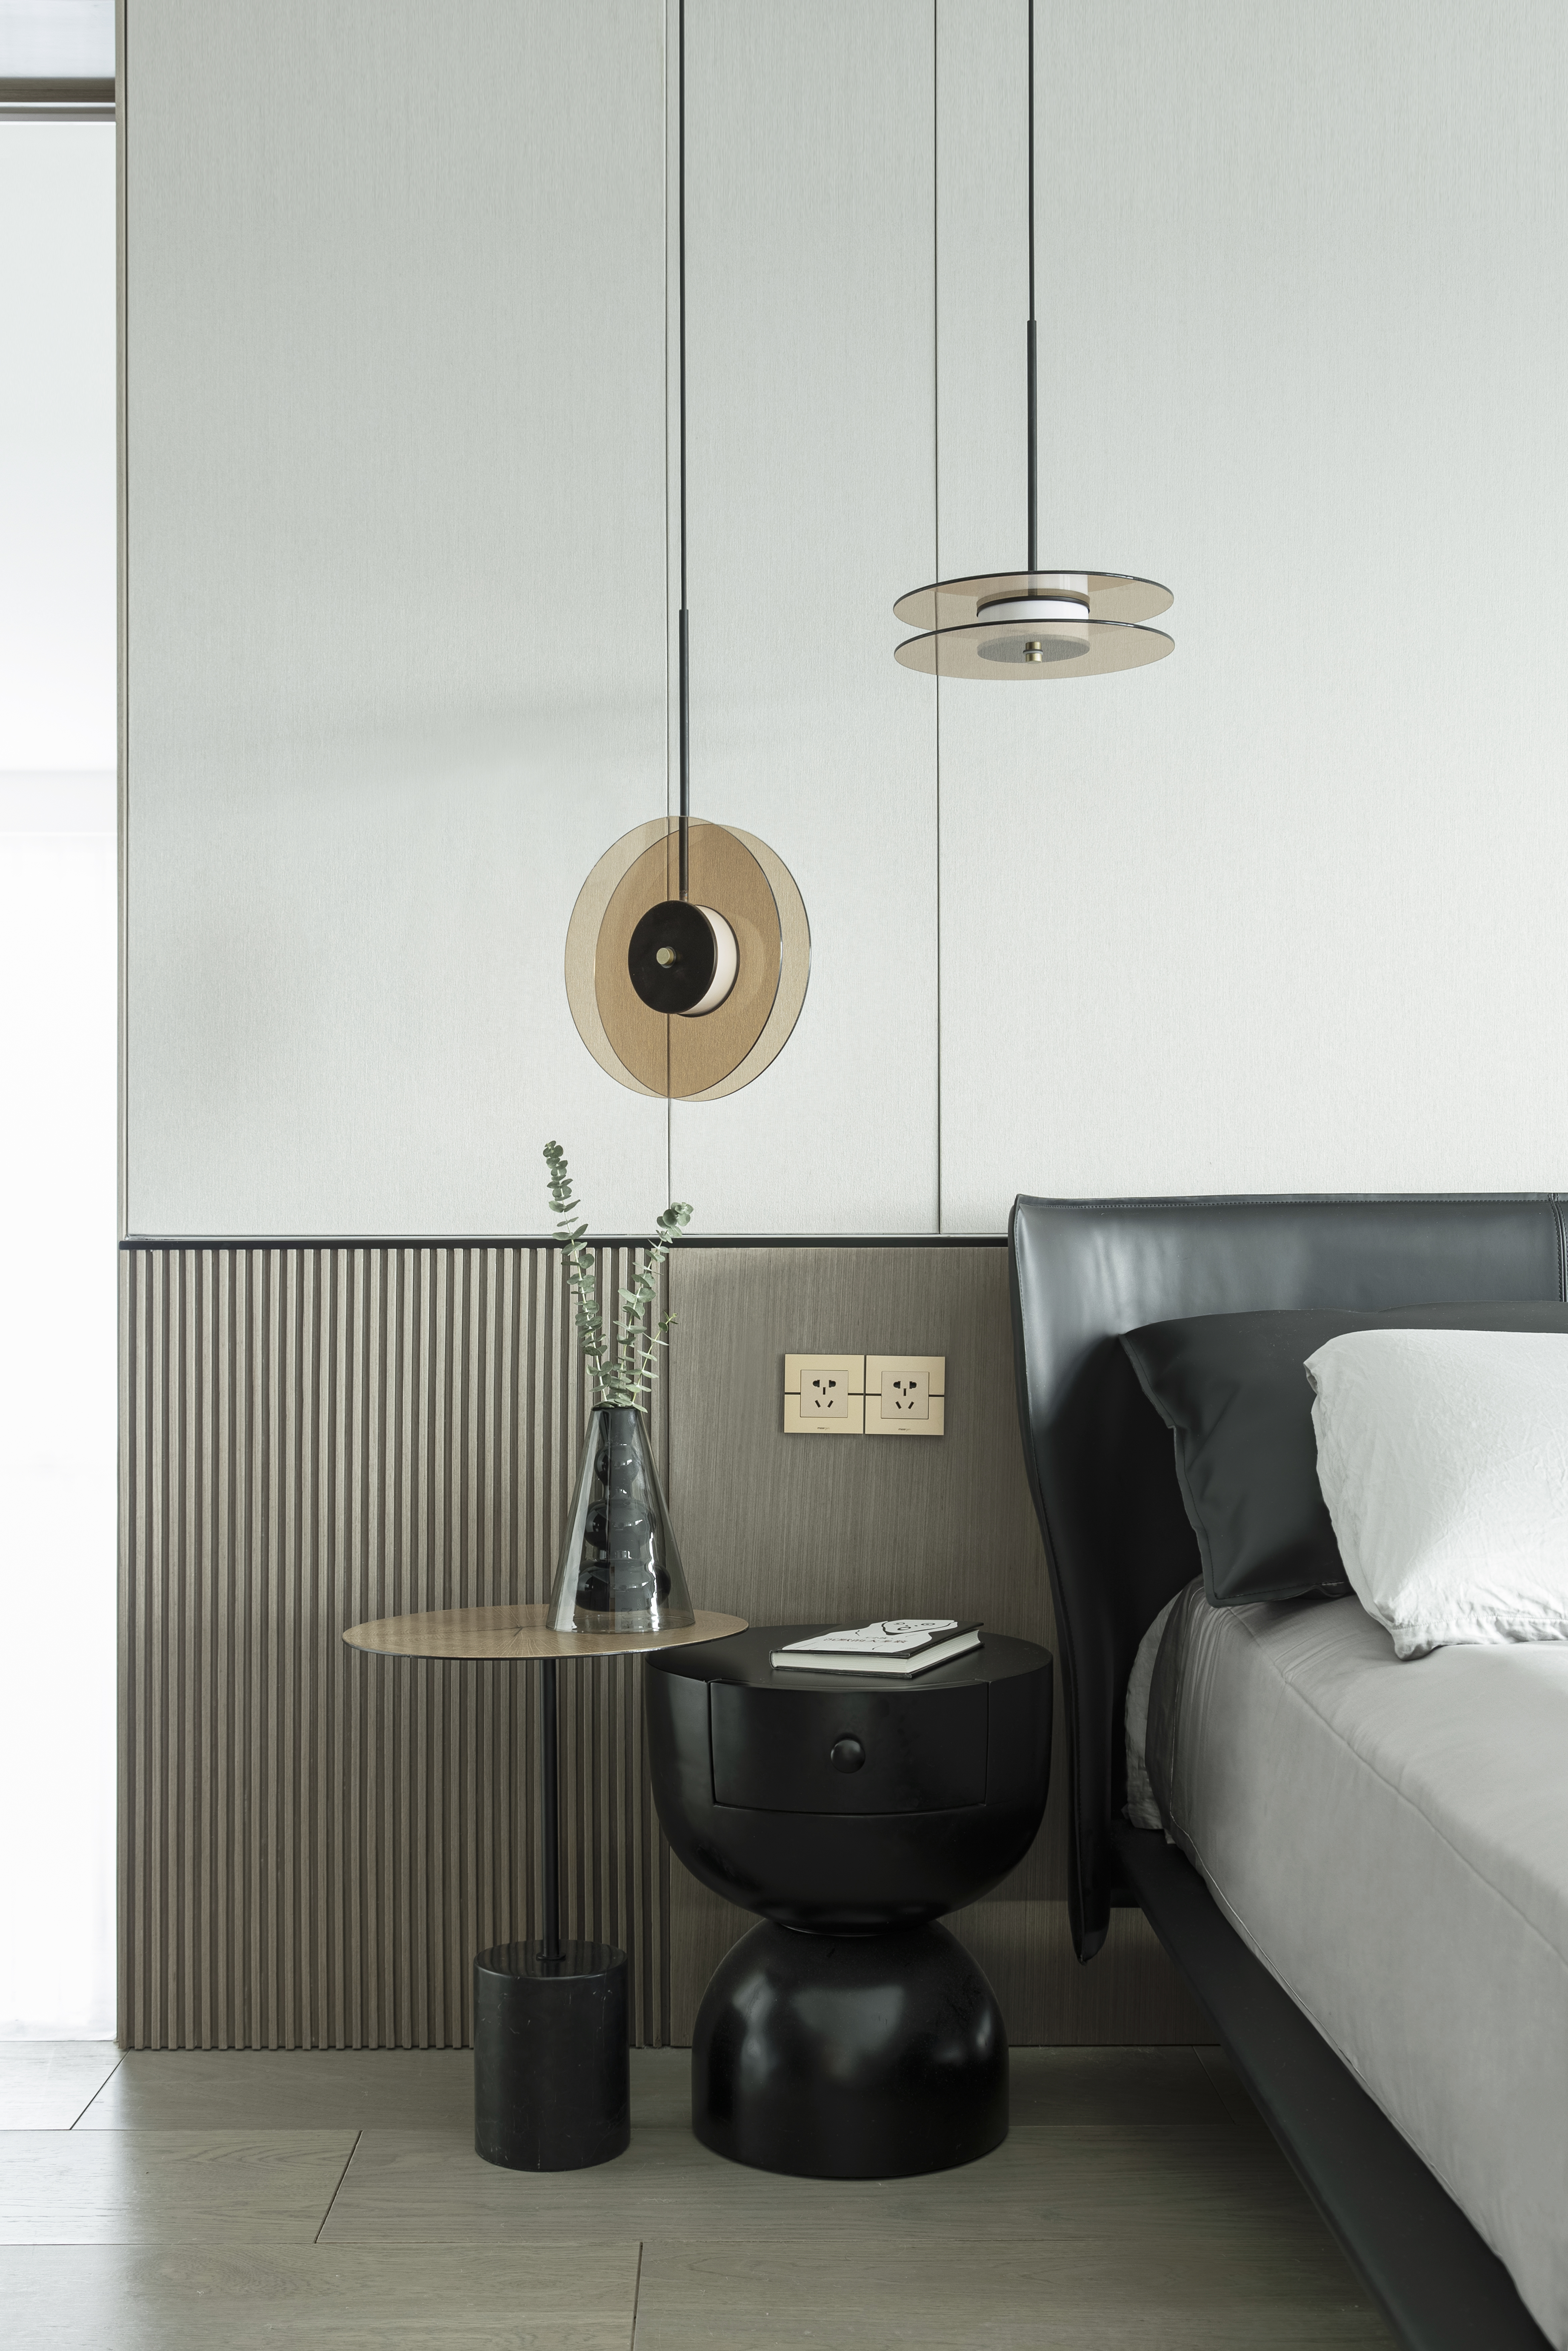 The pursuit of happiness reflected in the luxury apartment by Muxin Studio - Master Suite